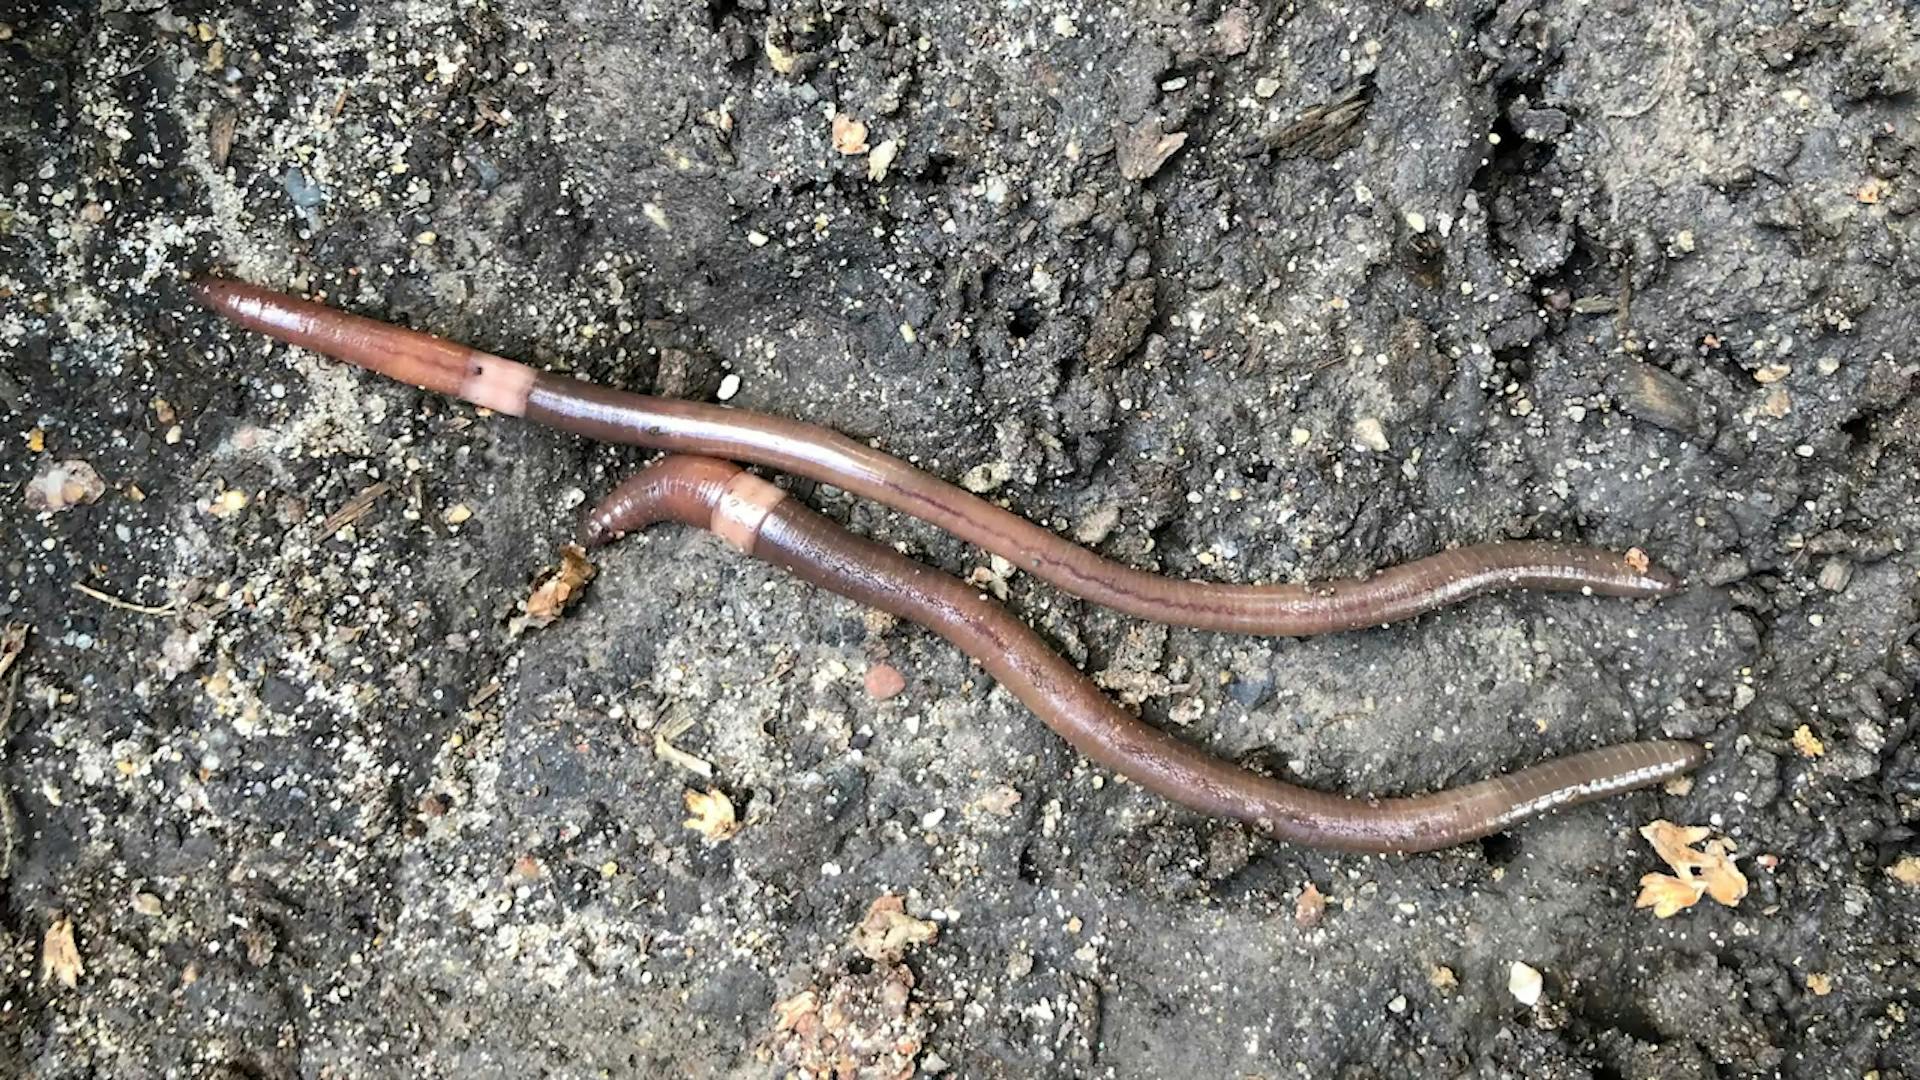 Jumping worms can dramatically change soils, giving it a unique texture similar to coffee grounds. Jumping worms feast on mulch and strip vital nutrients from topsoil. This kills plants and increases erosion.